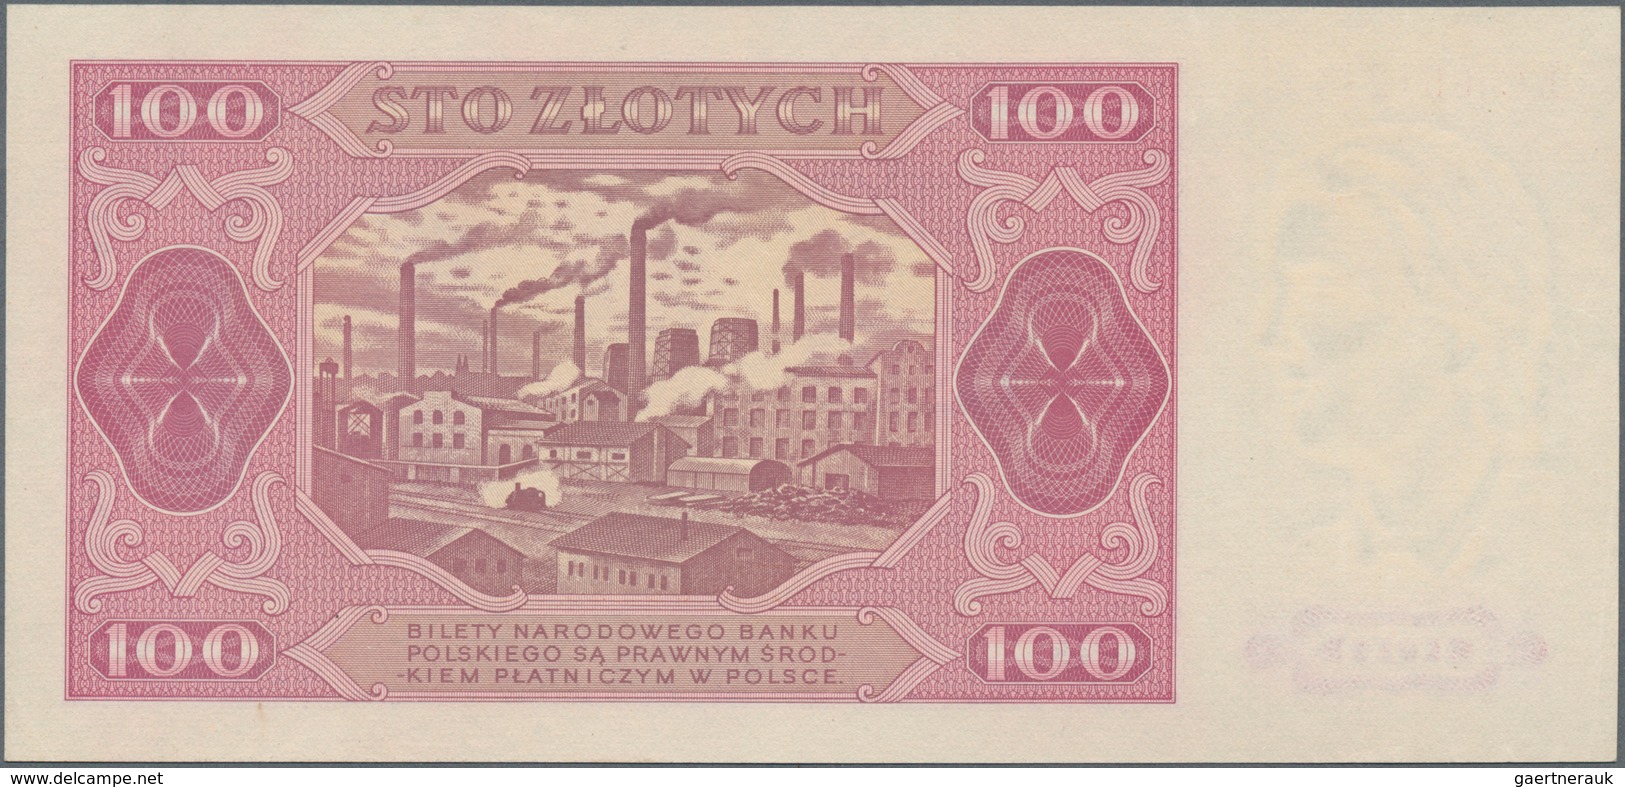 Poland / Polen: Set with 5 Banknotes series 1948 with 2, 10, 20, 50 and 100 Zlotych, P.134, 136-139